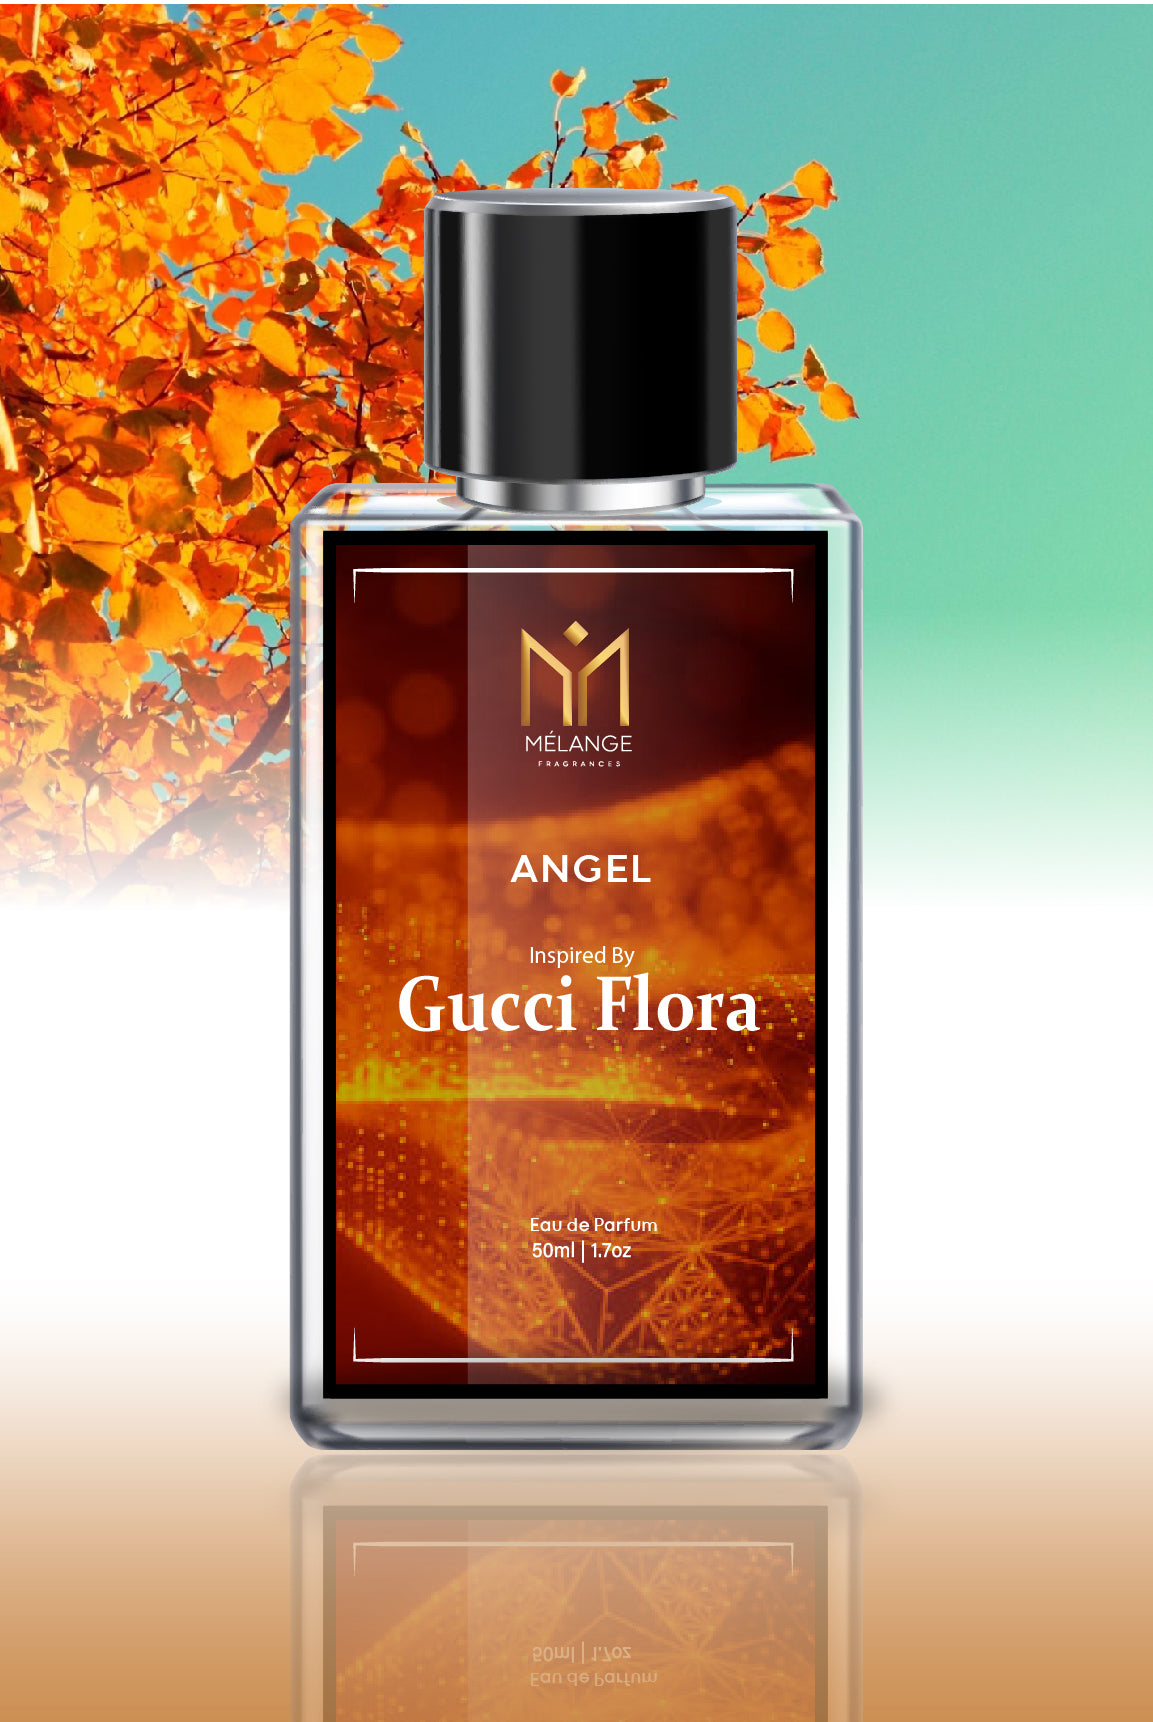 ANGEL- Inspired By Gucci Flora